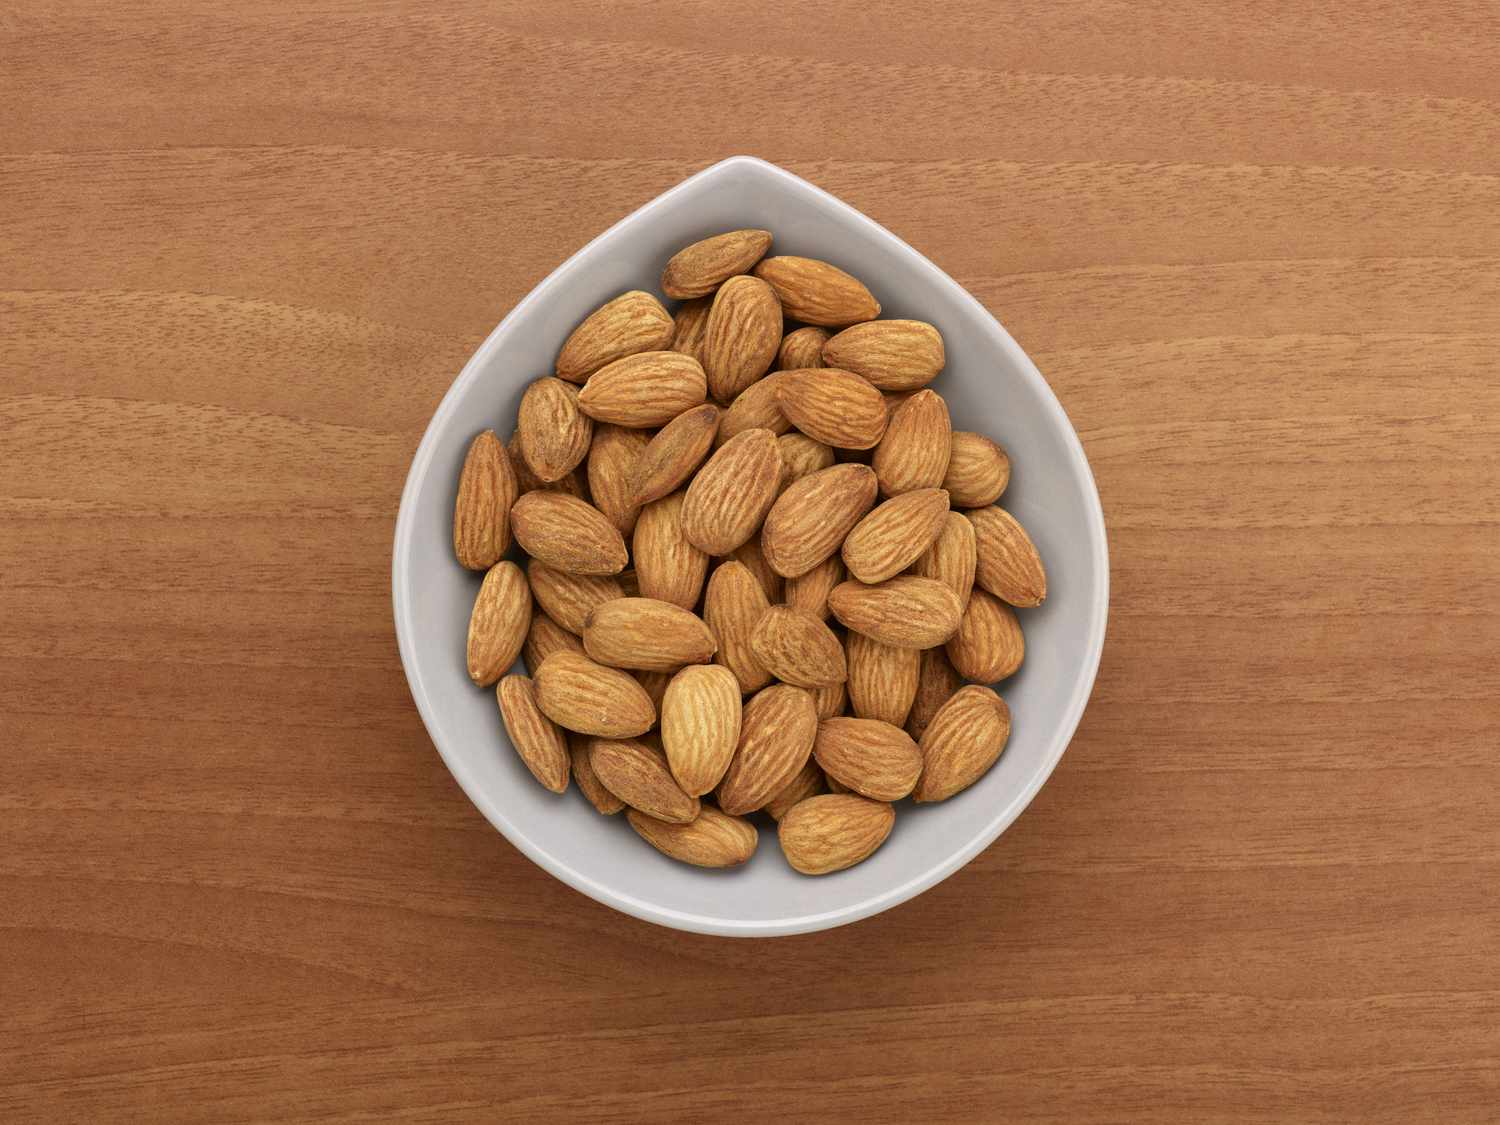 Roasted Almonds In A Bowl